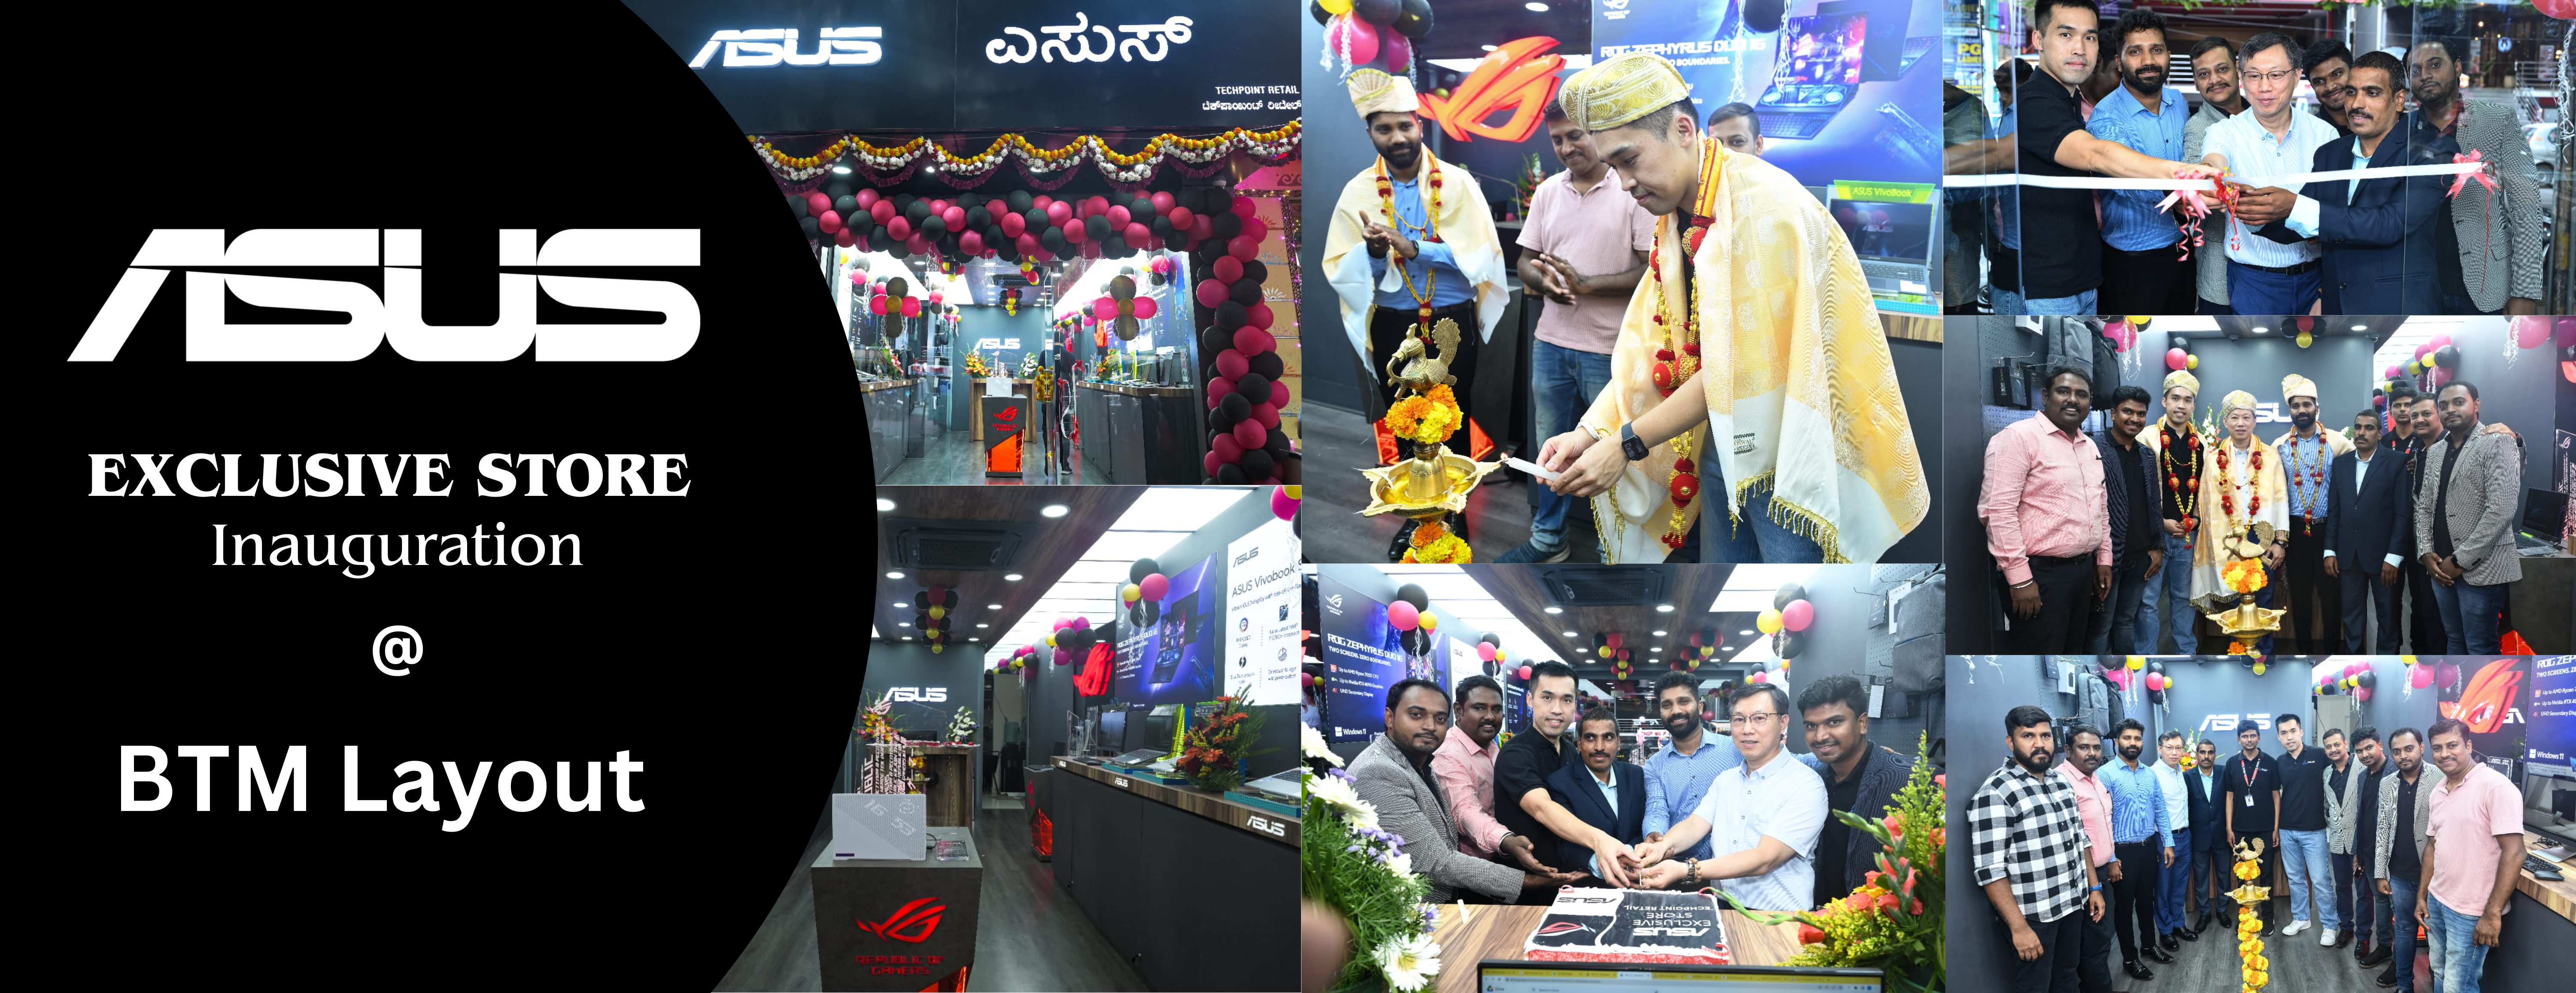 We are thrilled to announce that our ASUS Exclusive Store-BTM Techpoint Retail is now open! Come and visit us at ASUS Exclusive Store-BTM Lyout and explore our amazing selection of ASUS laptops Our store was inaugurated by Eric Ou, country head of Asus with Arnold Su, vice president of PC, and Santhosh Kumar Branch Sales Manager- KARNATAKA & Varun Grover Territory Manager Retail- Bangalore. Check out some photos from our grand opening below. Follow us on Facebook